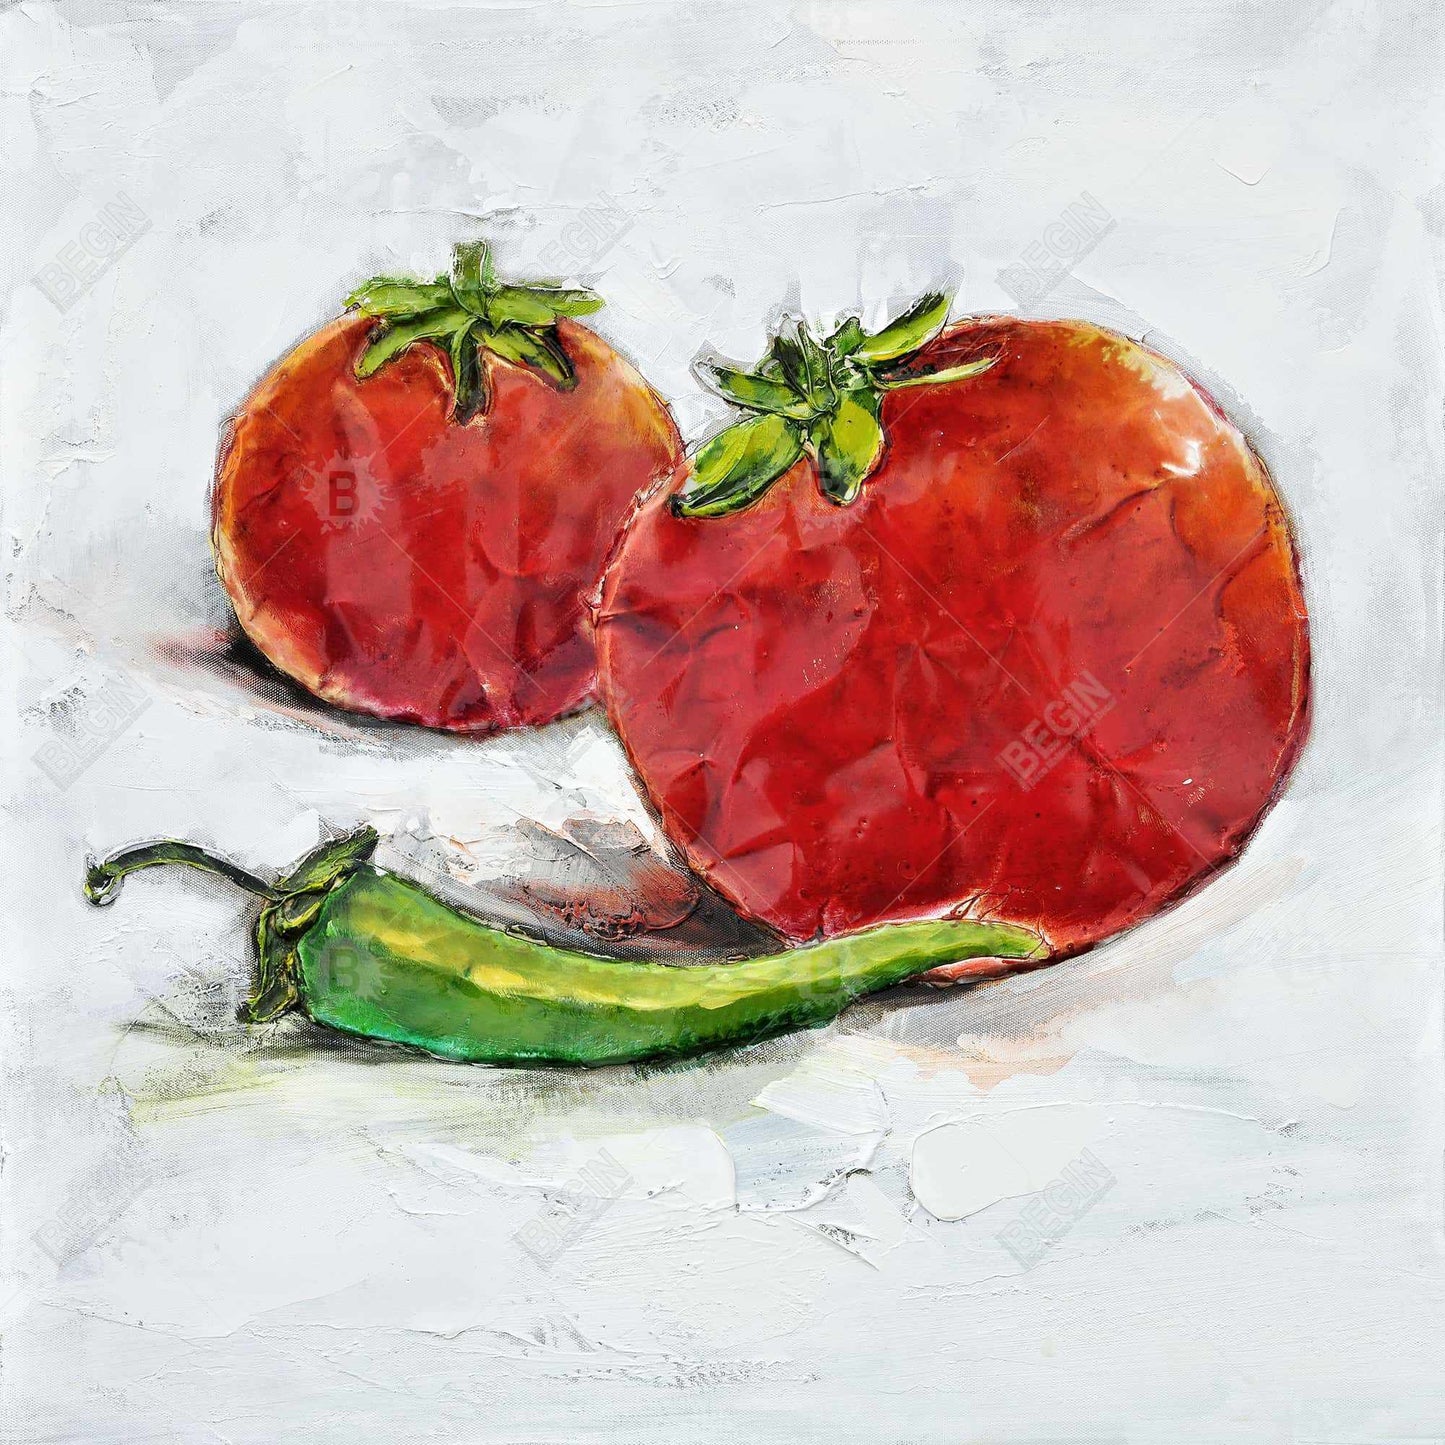 Tomatoes with jalapeño - 32x32 Print on canvas